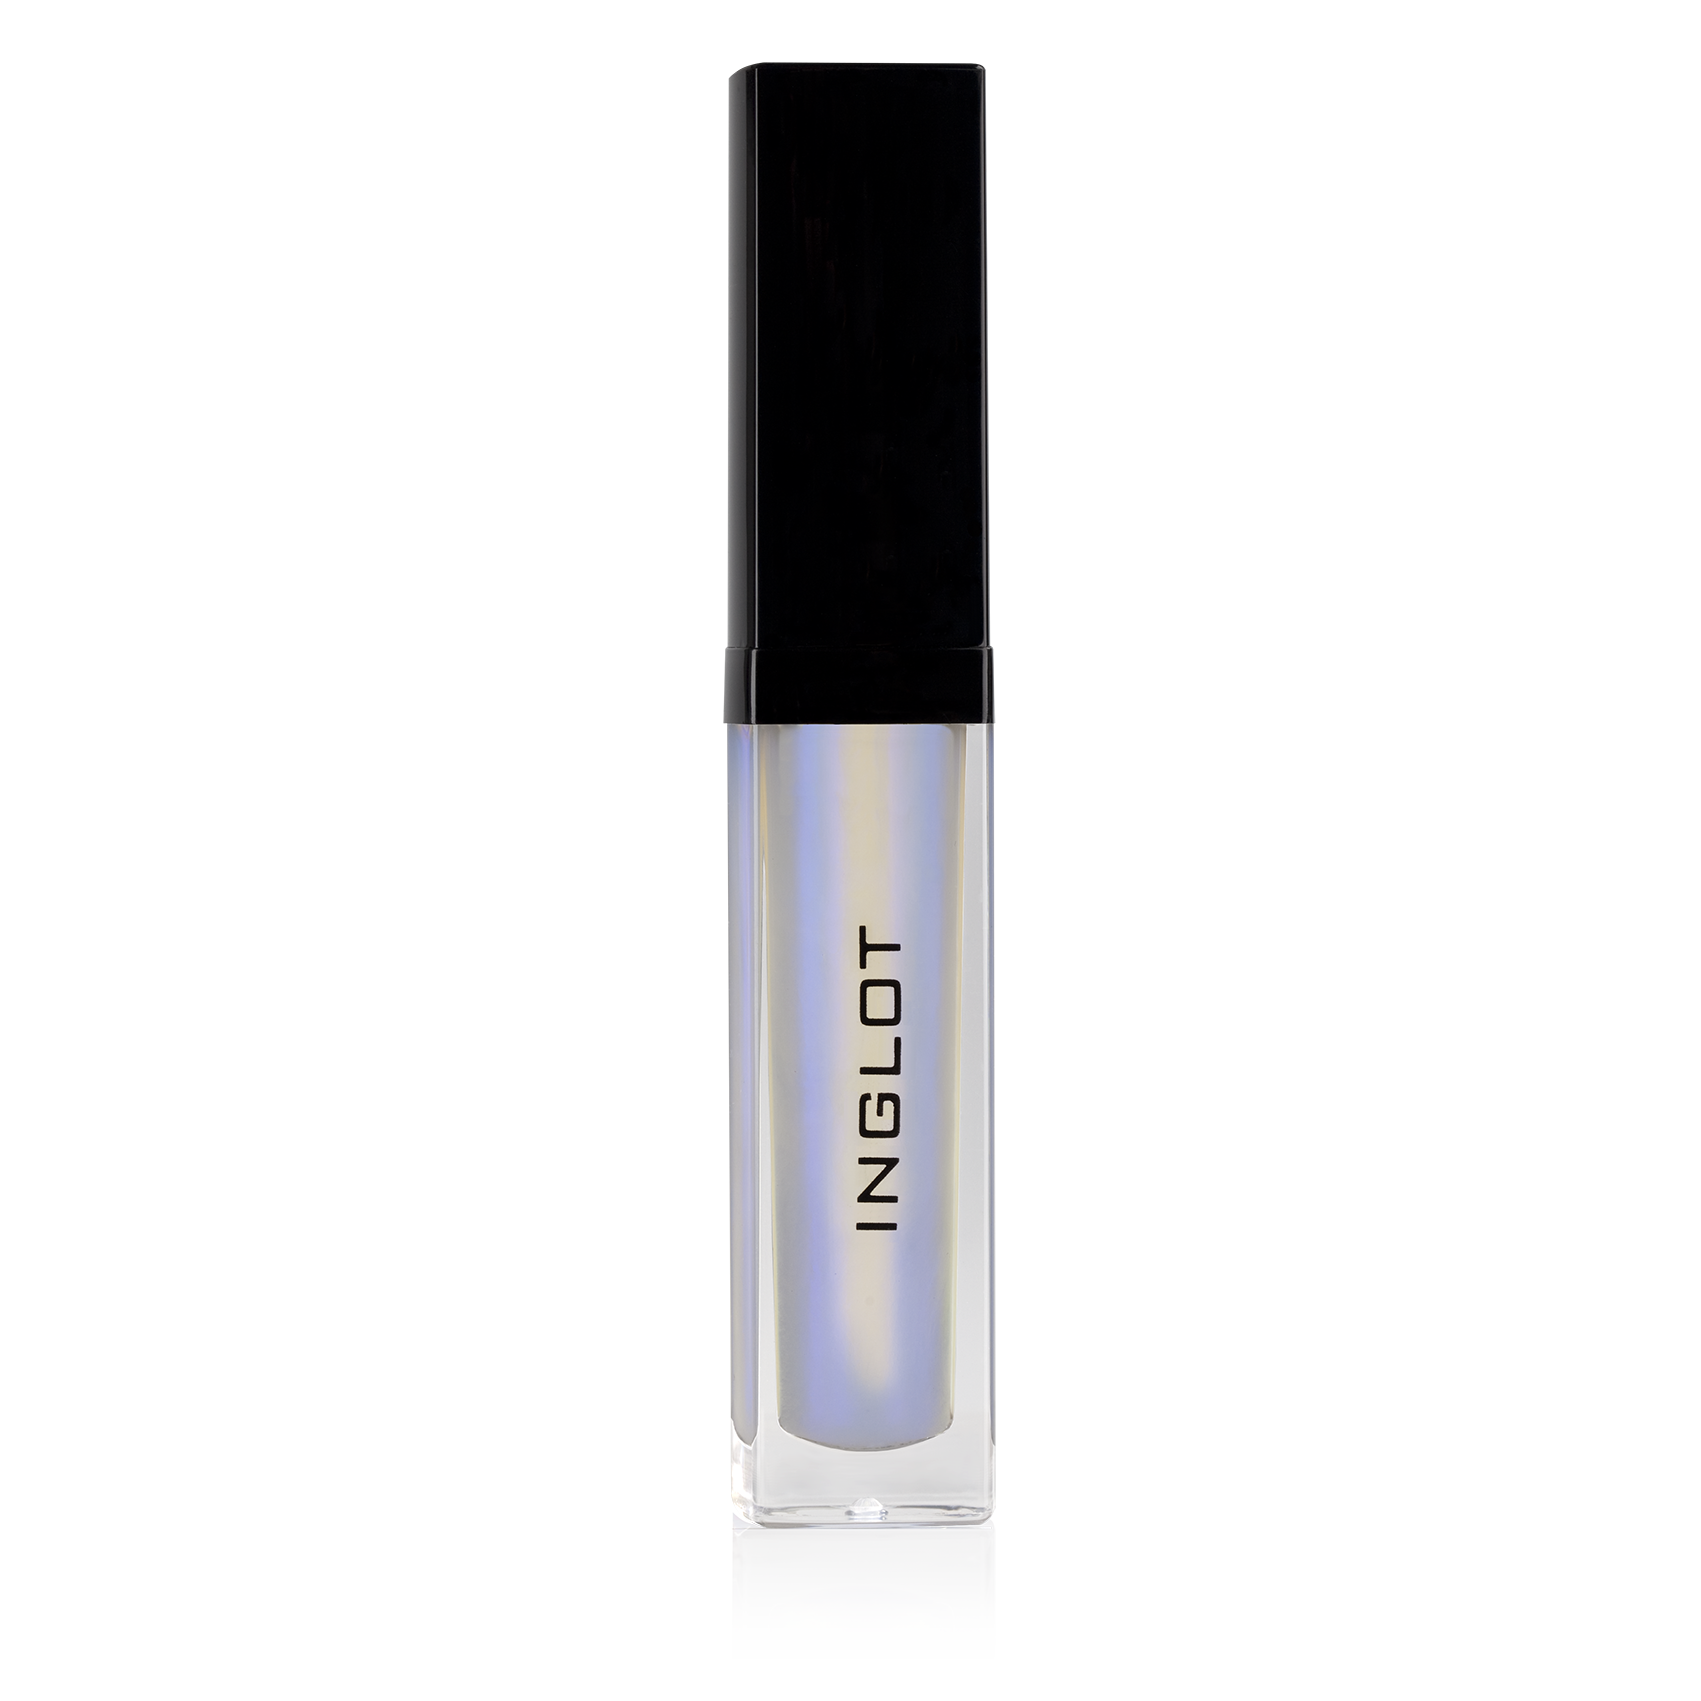 White Inglot lip gloss used in the center of the lips for a POP!